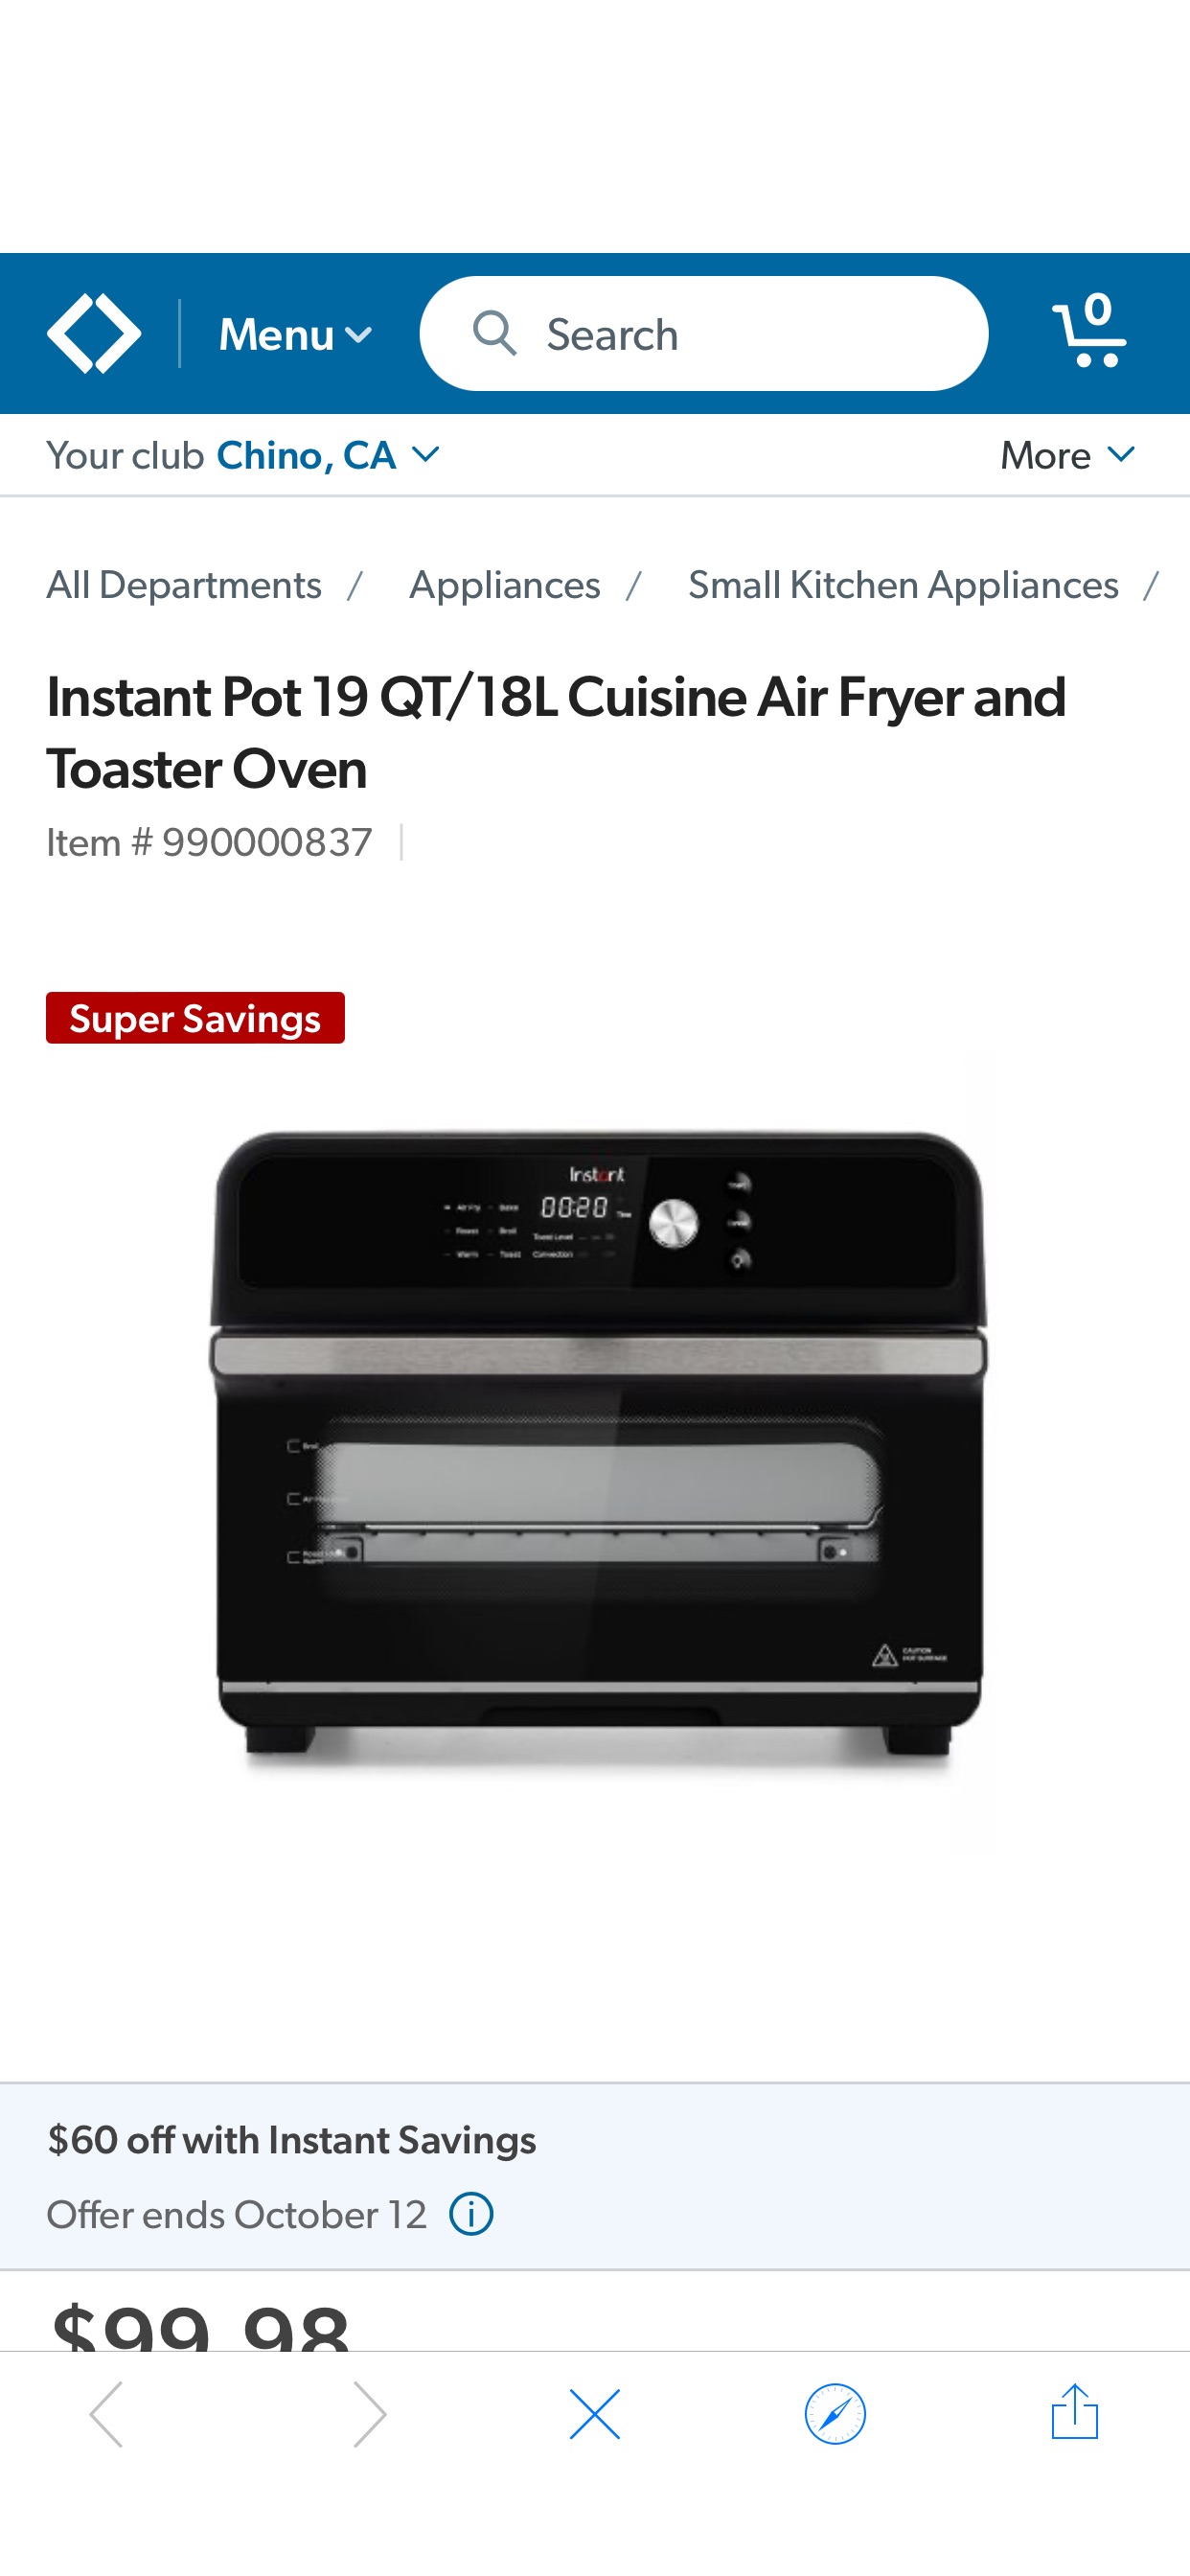 Instant Pot 19 QT/18L Cuisine Air Fryer and Toaster Oven 烤箱 - Sam's Club